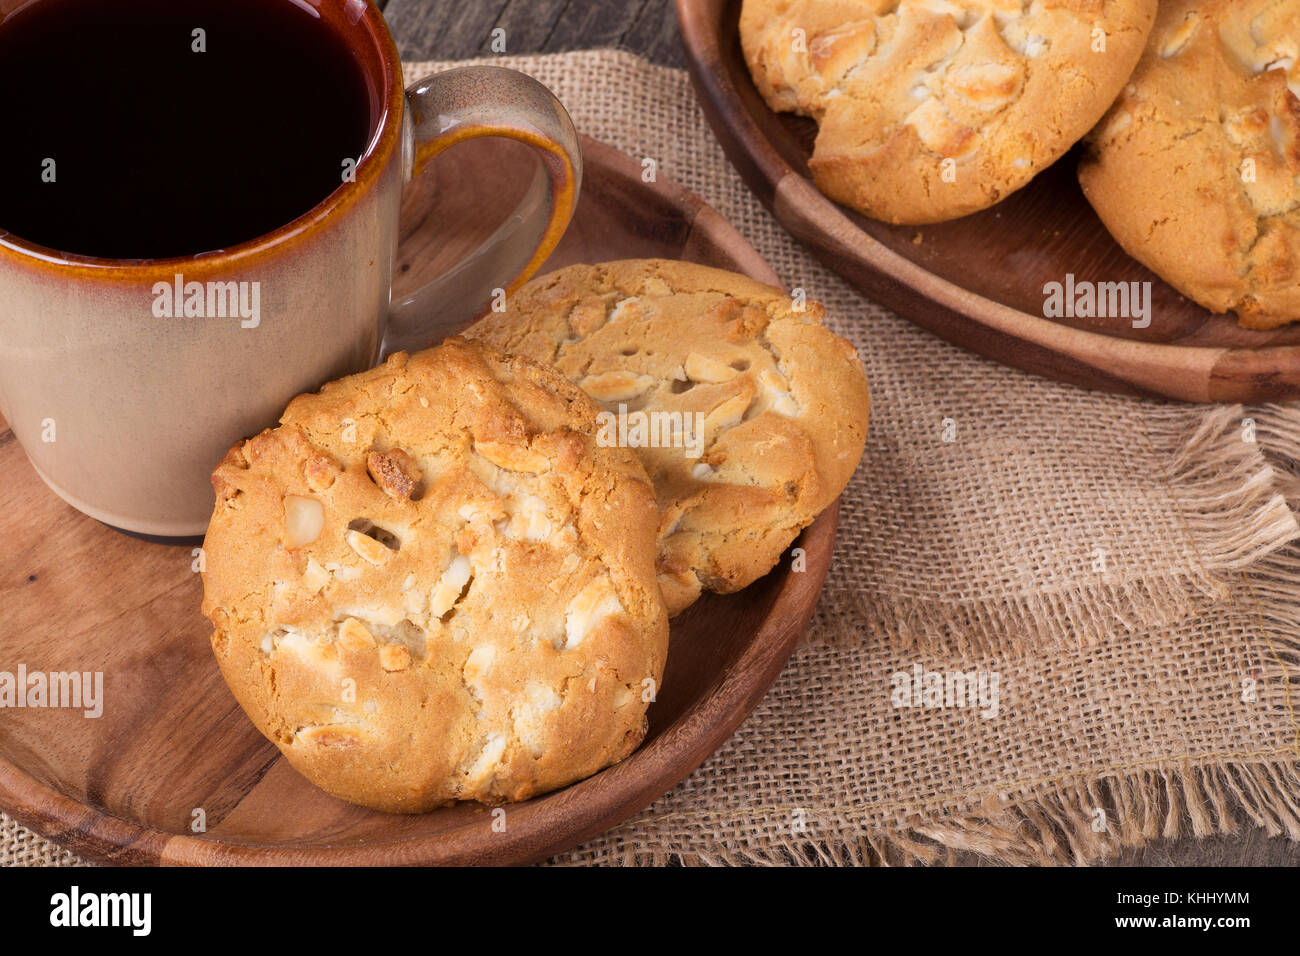 White chocolate macadamia nut cookies and cup of coffee Stock Photo